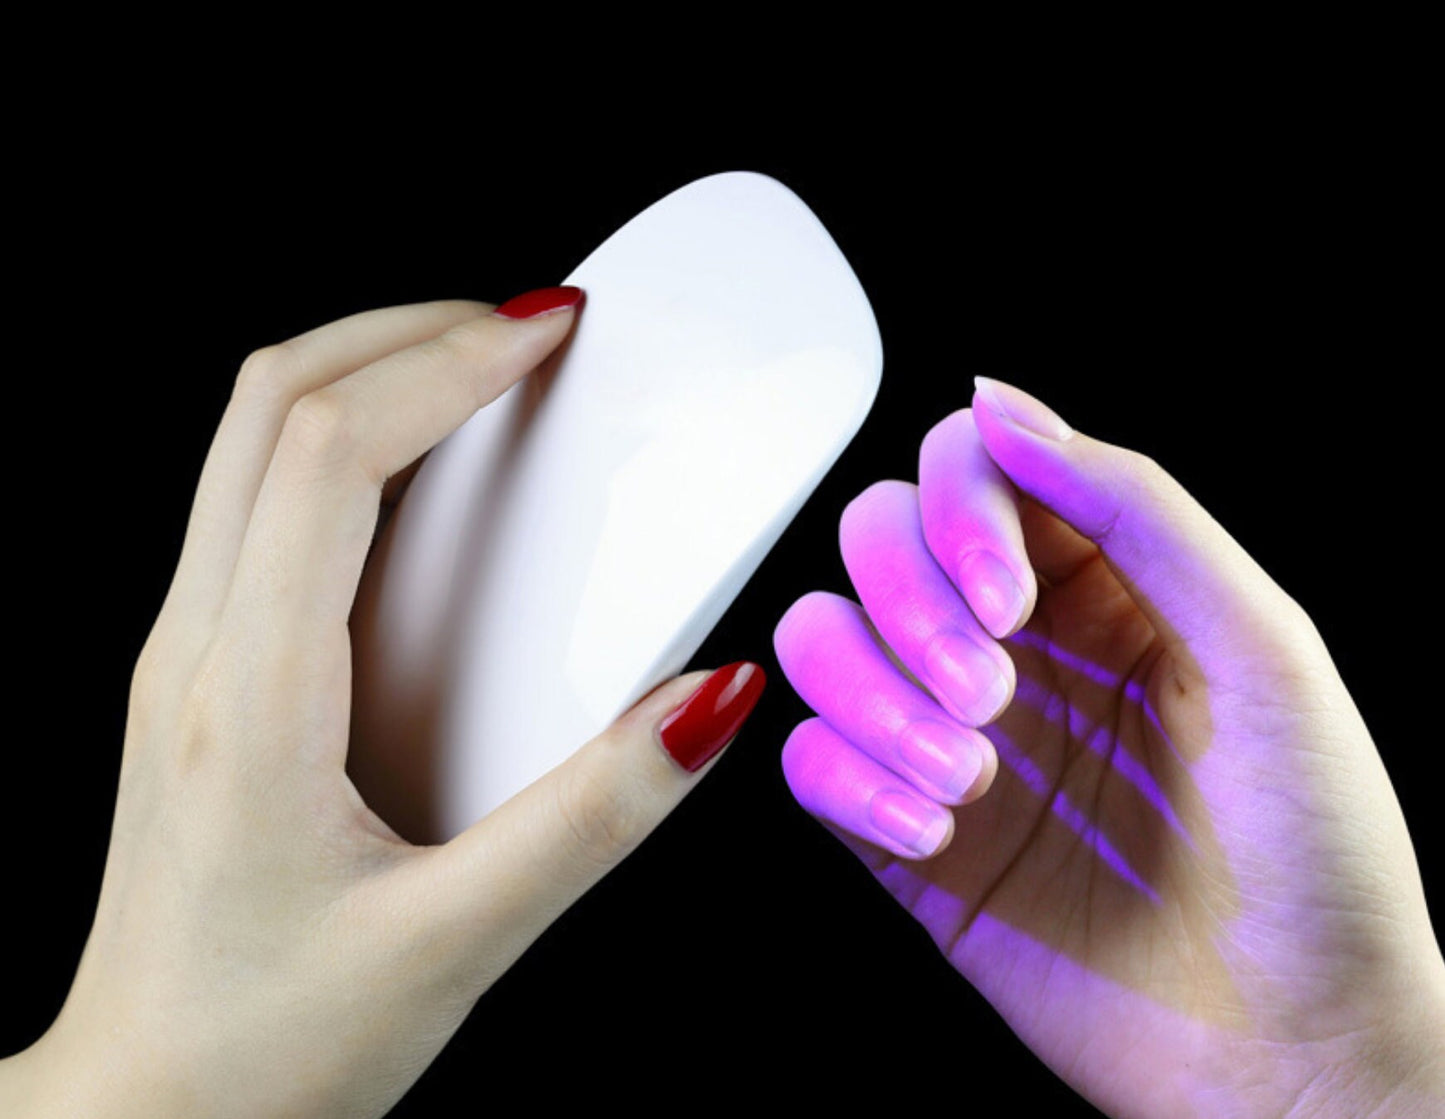 6w UV LED Lamp Nail Dryer Portable USB Cable/ Led Nail Lamp 40s 60s Gel Nail Dryer Home manicure diy light/ uv gel crafts